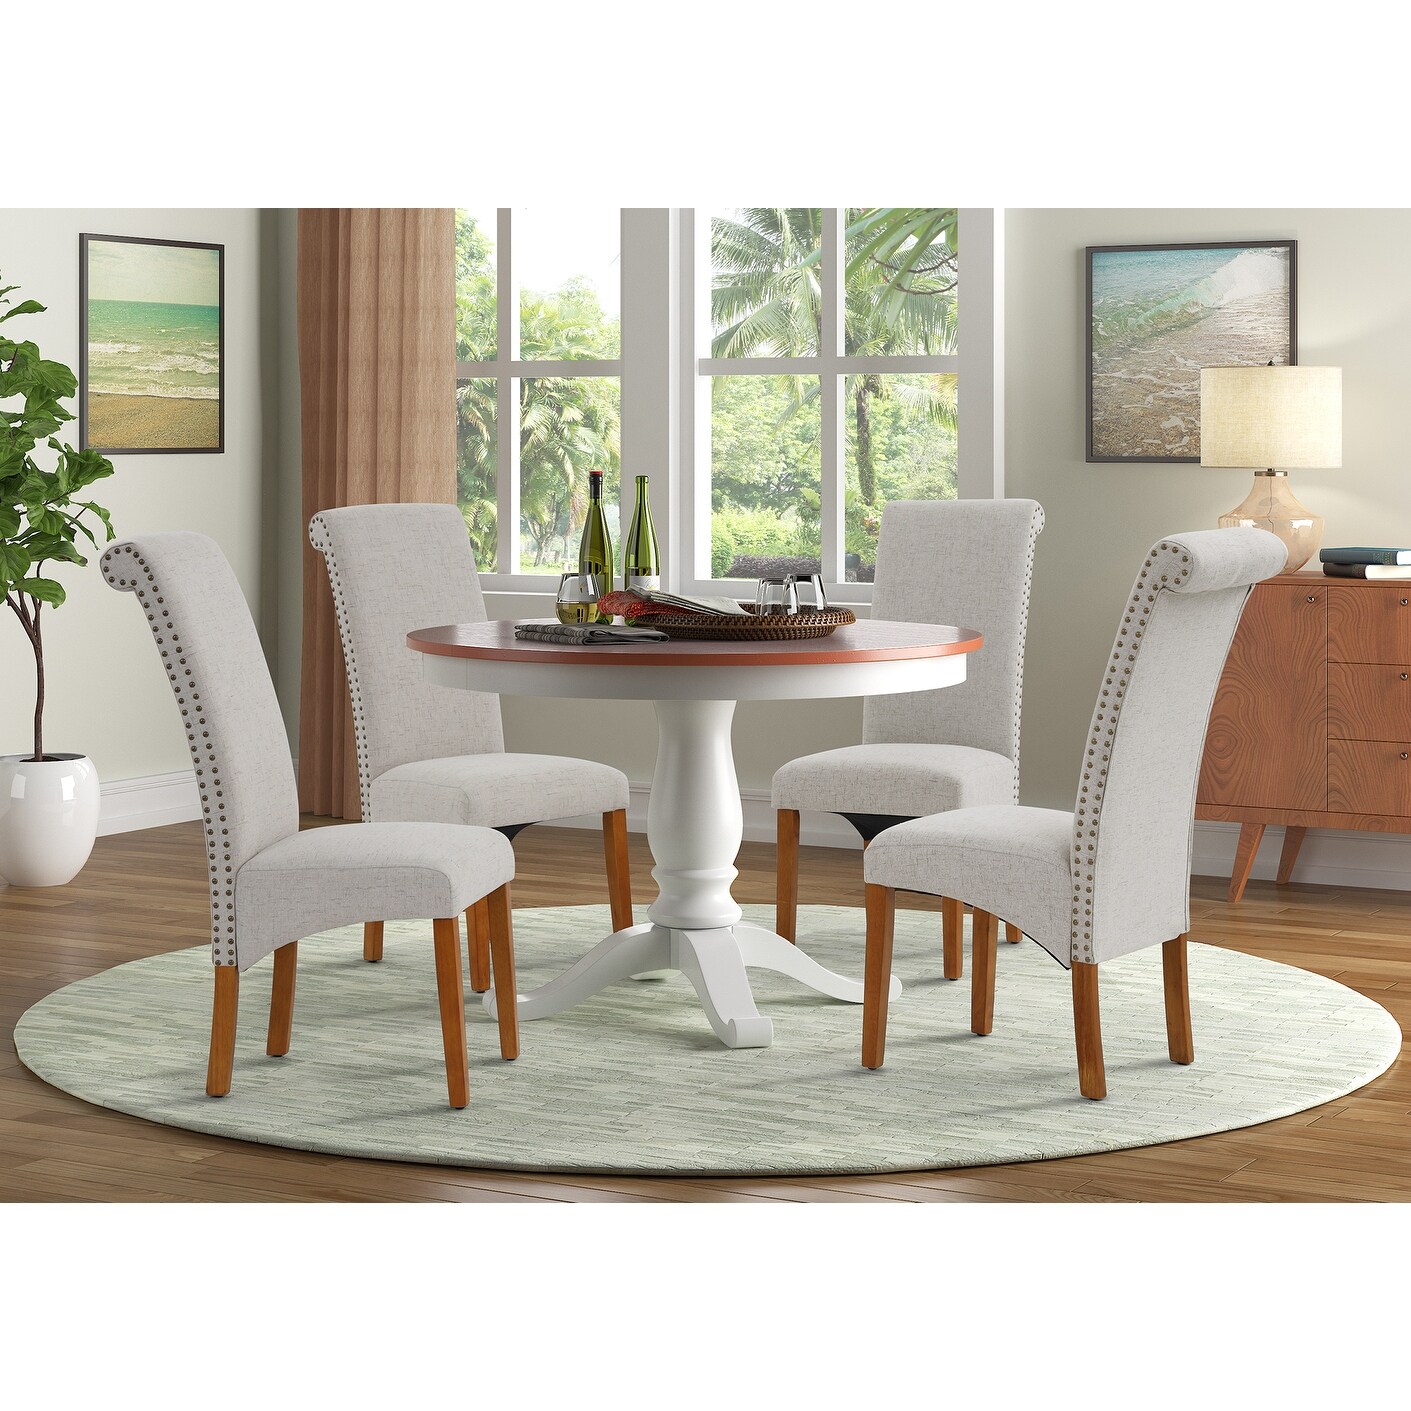 Jess 27 Inch Dining Chair, Soft Cushion Back, Set of 2 Faux Leather, White  - On Sale - Bed Bath & Beyond - 36155651